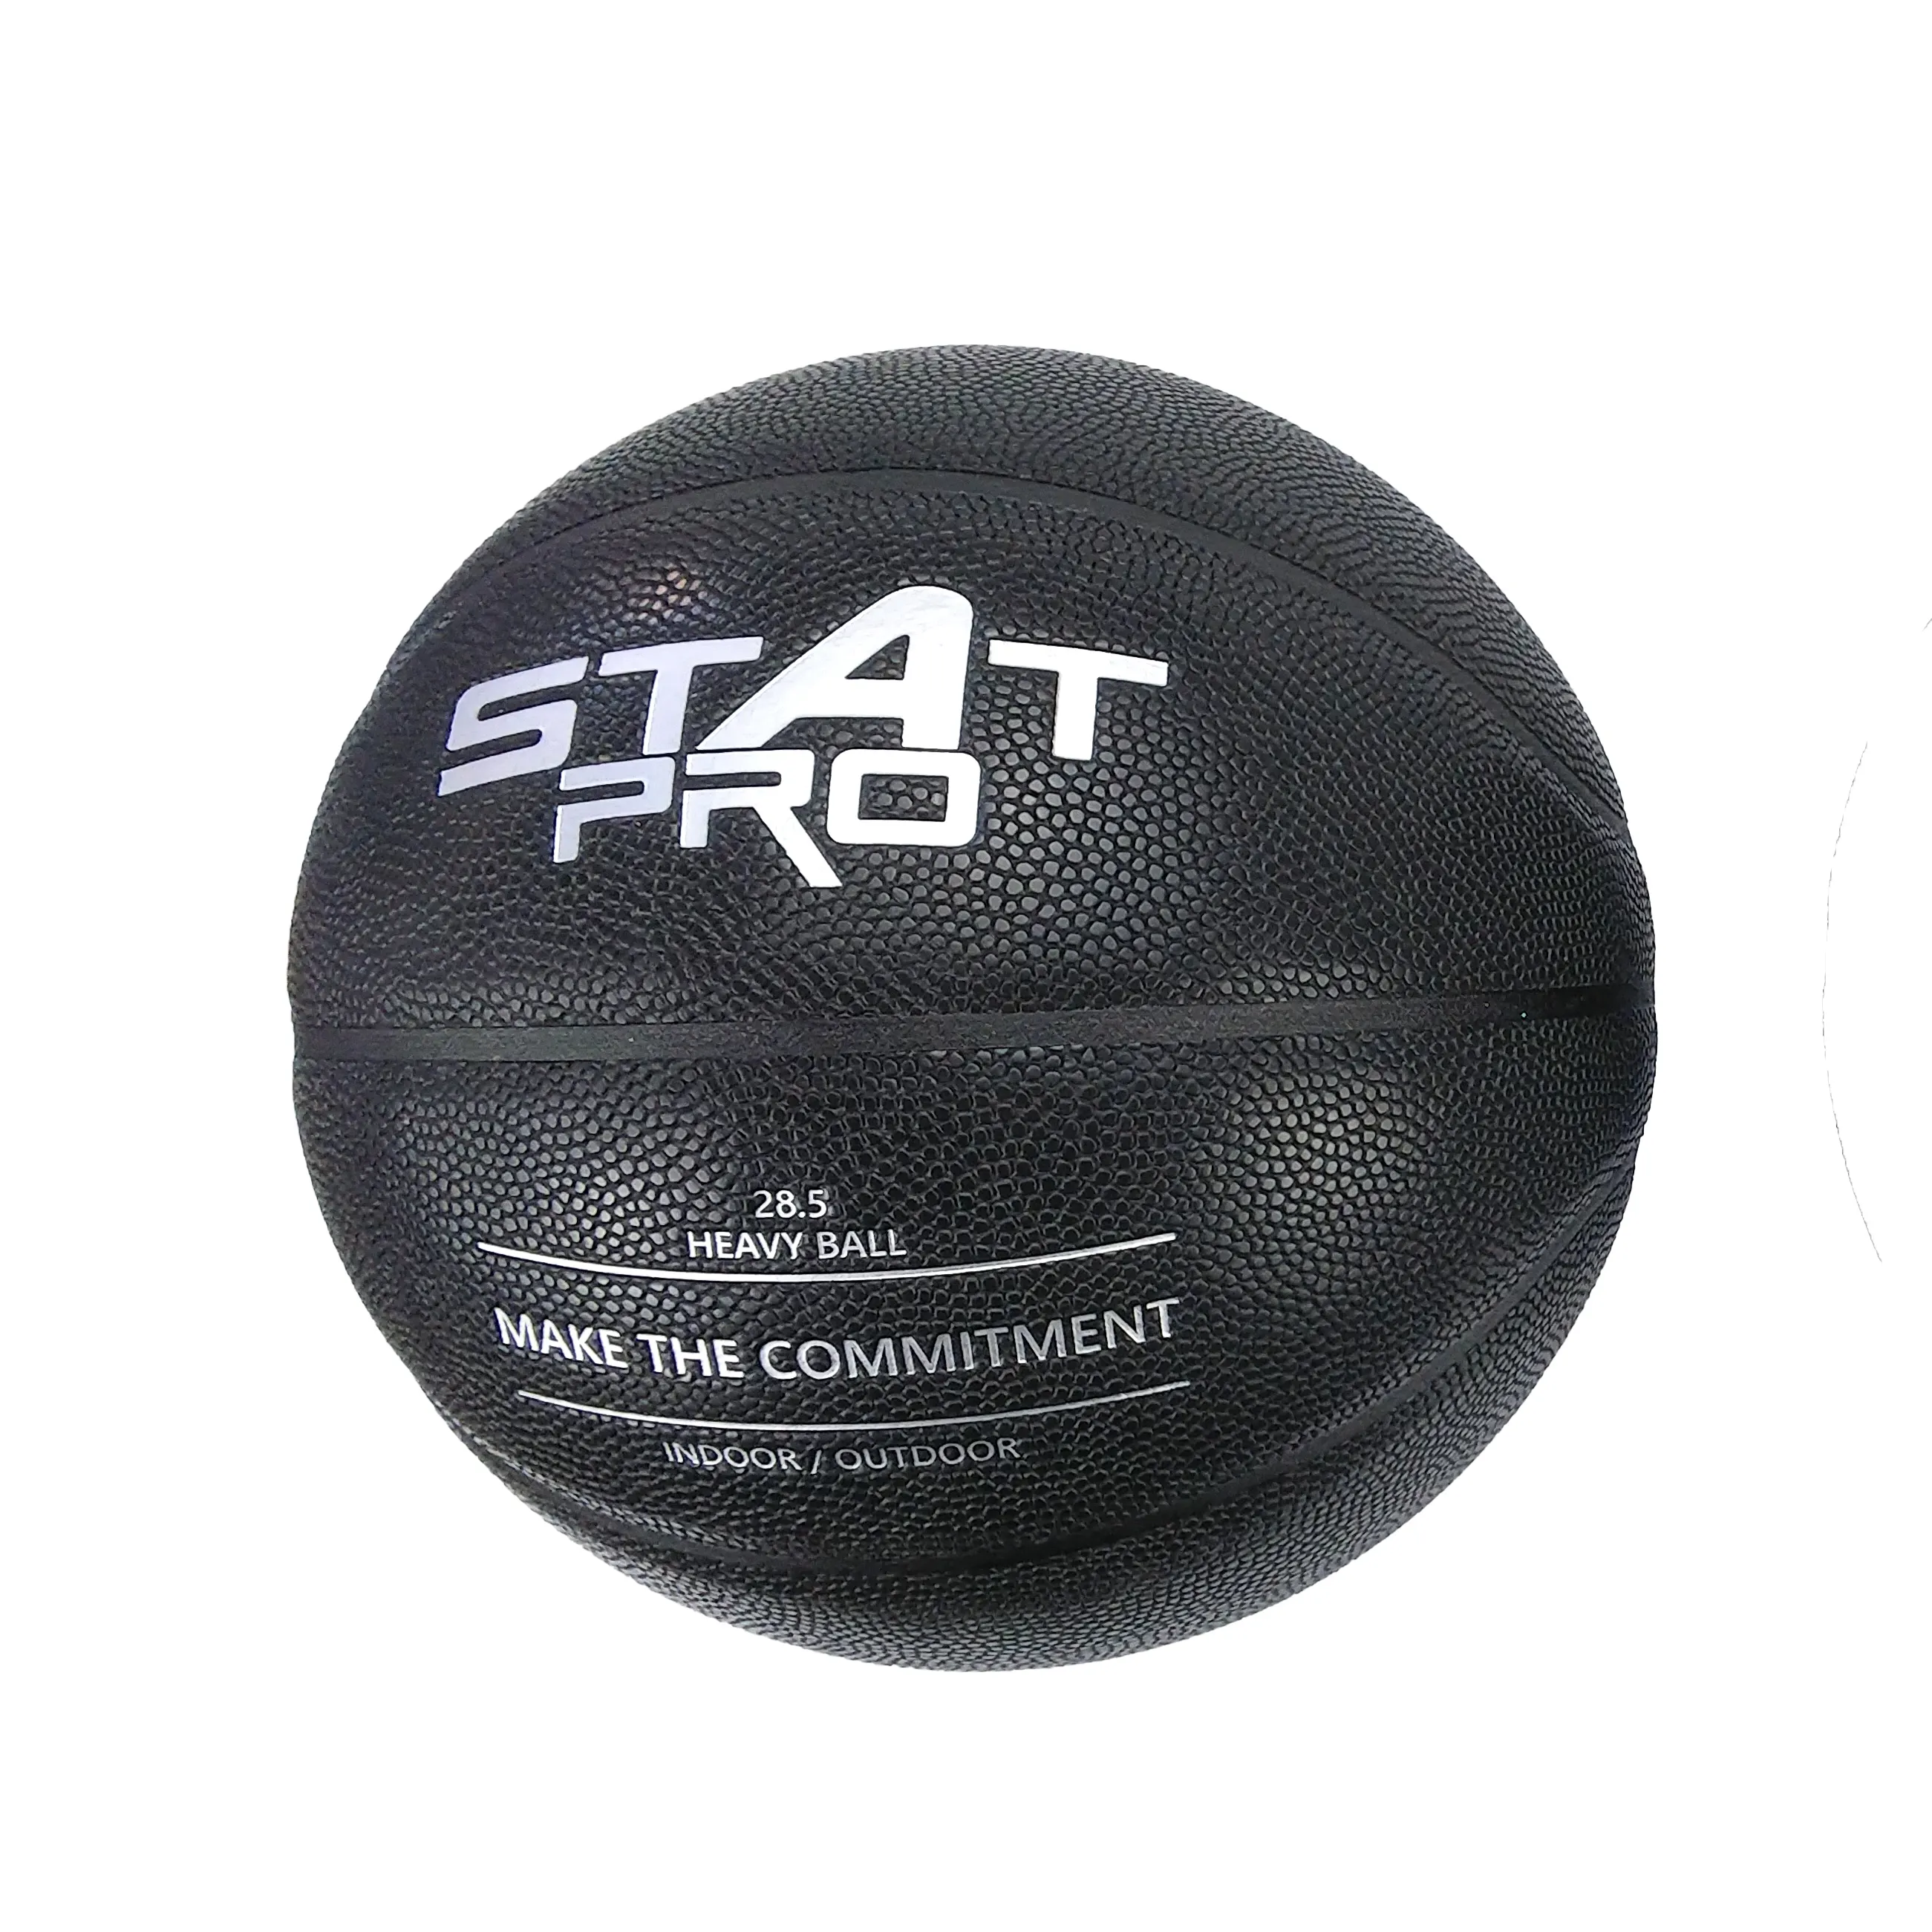 size 6 heavy basketball 28.5" weighted basketball for women girls training